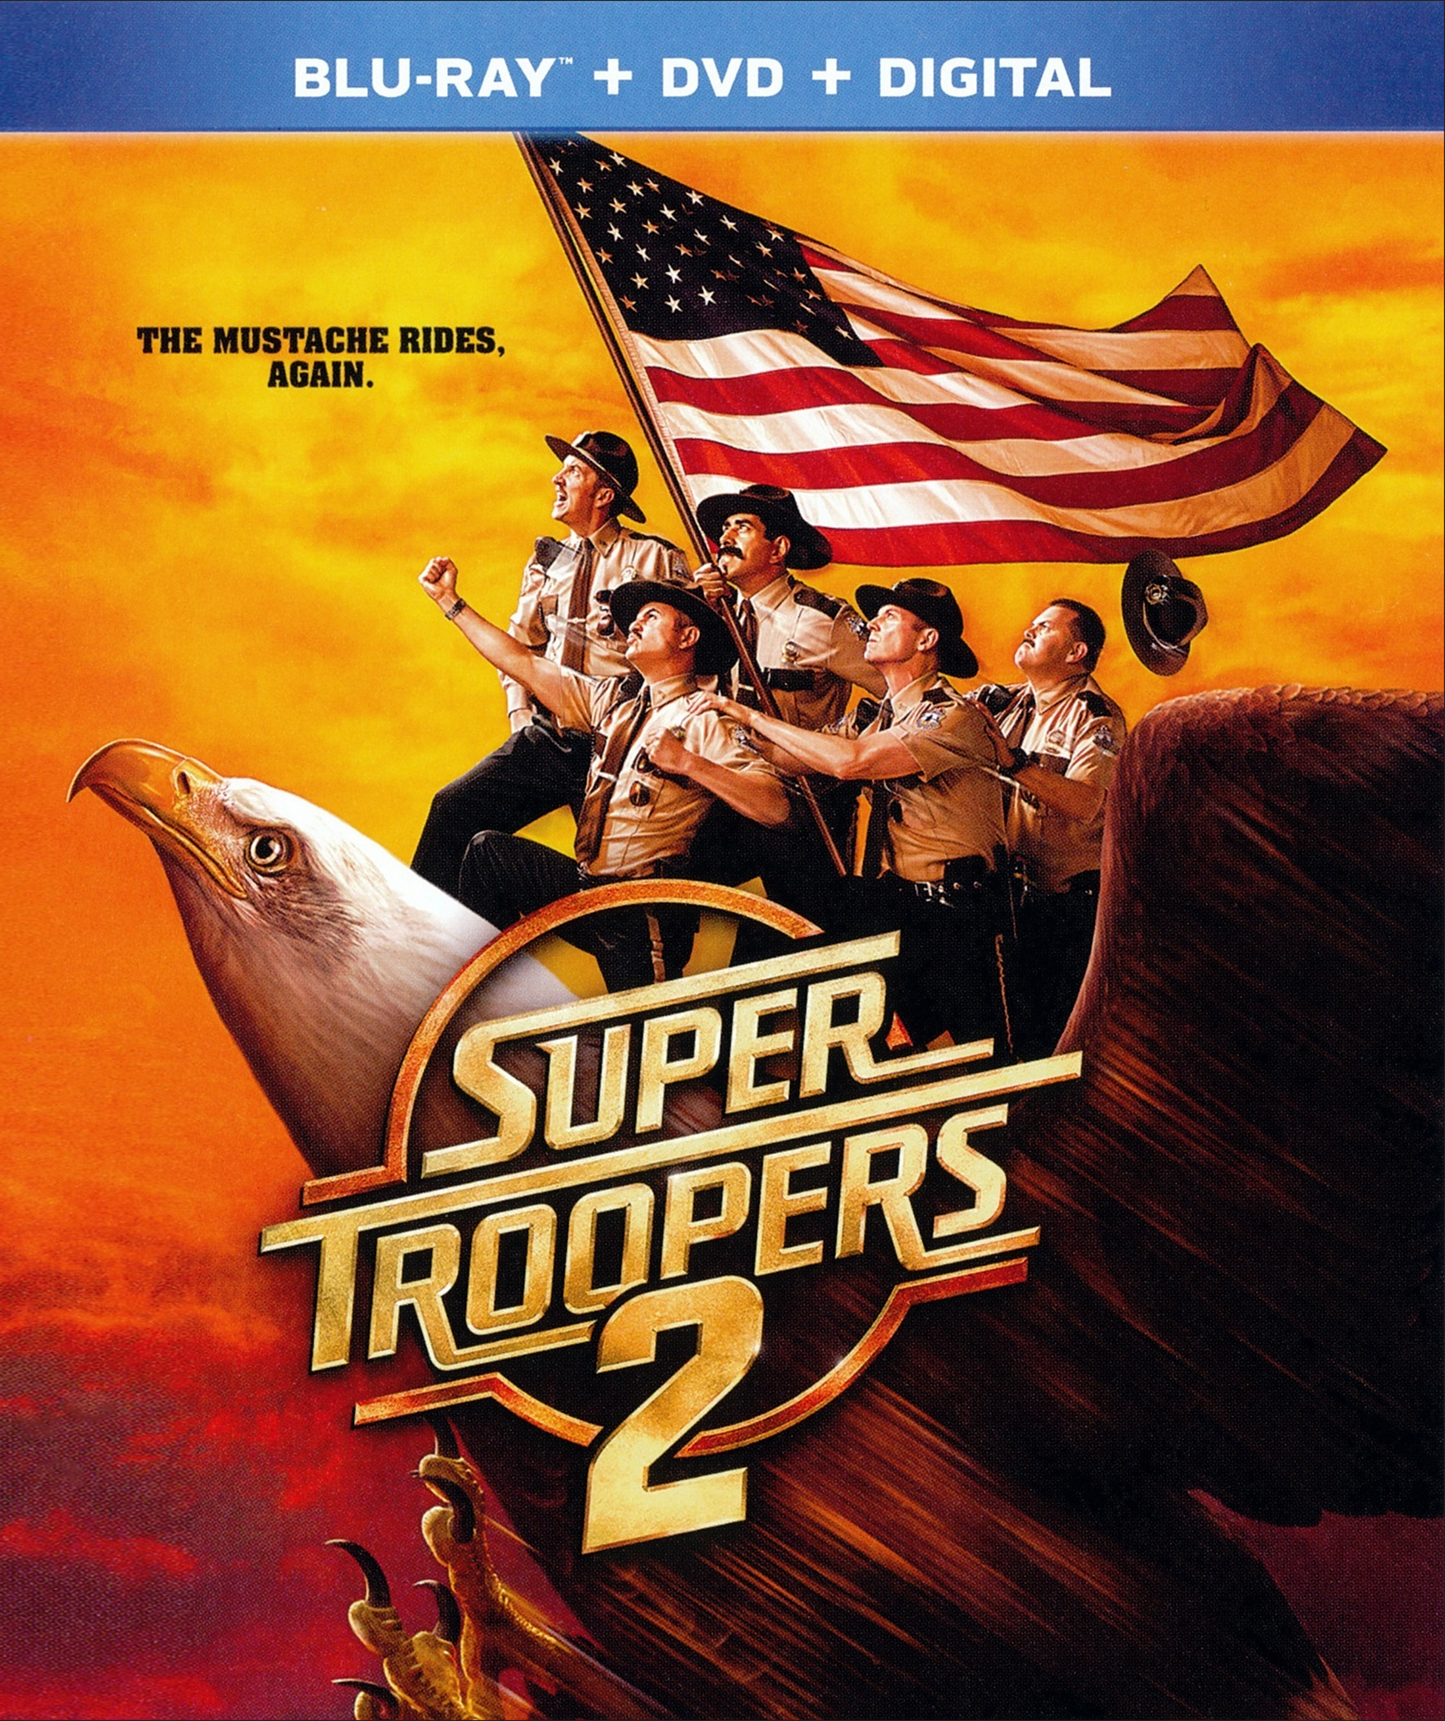 Super Troopers 2 - Blu-ray Comedy 2018 R